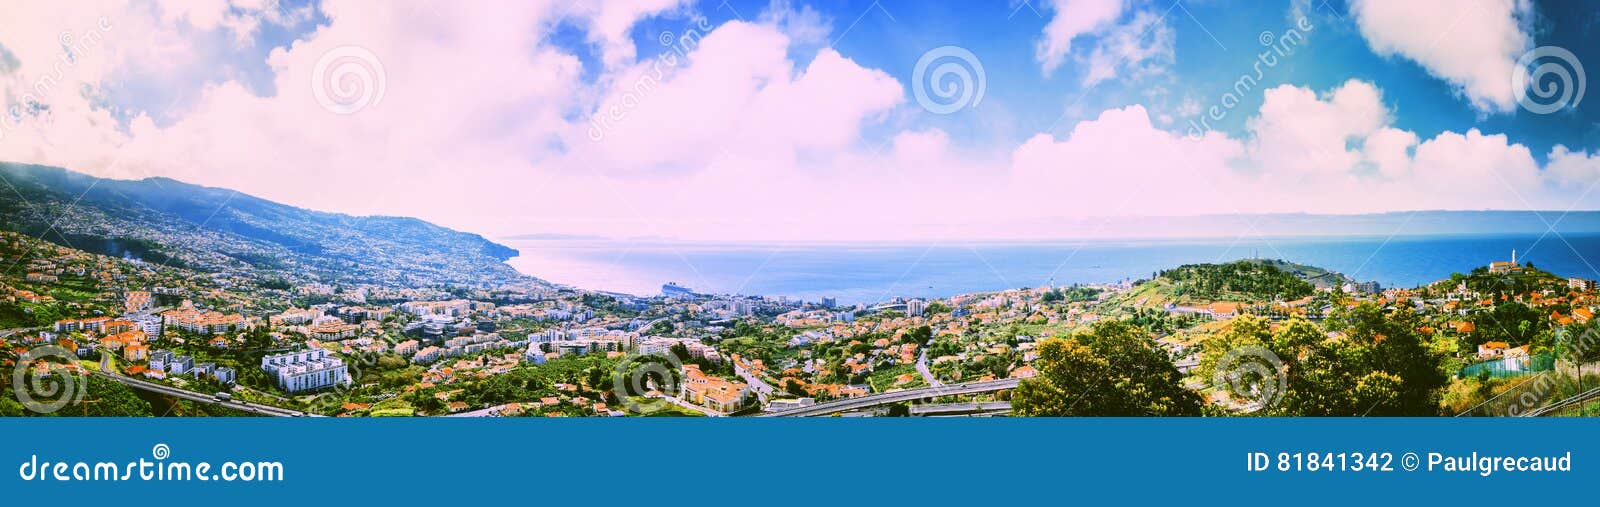 panoramic landscape with view of funchal, madeira island